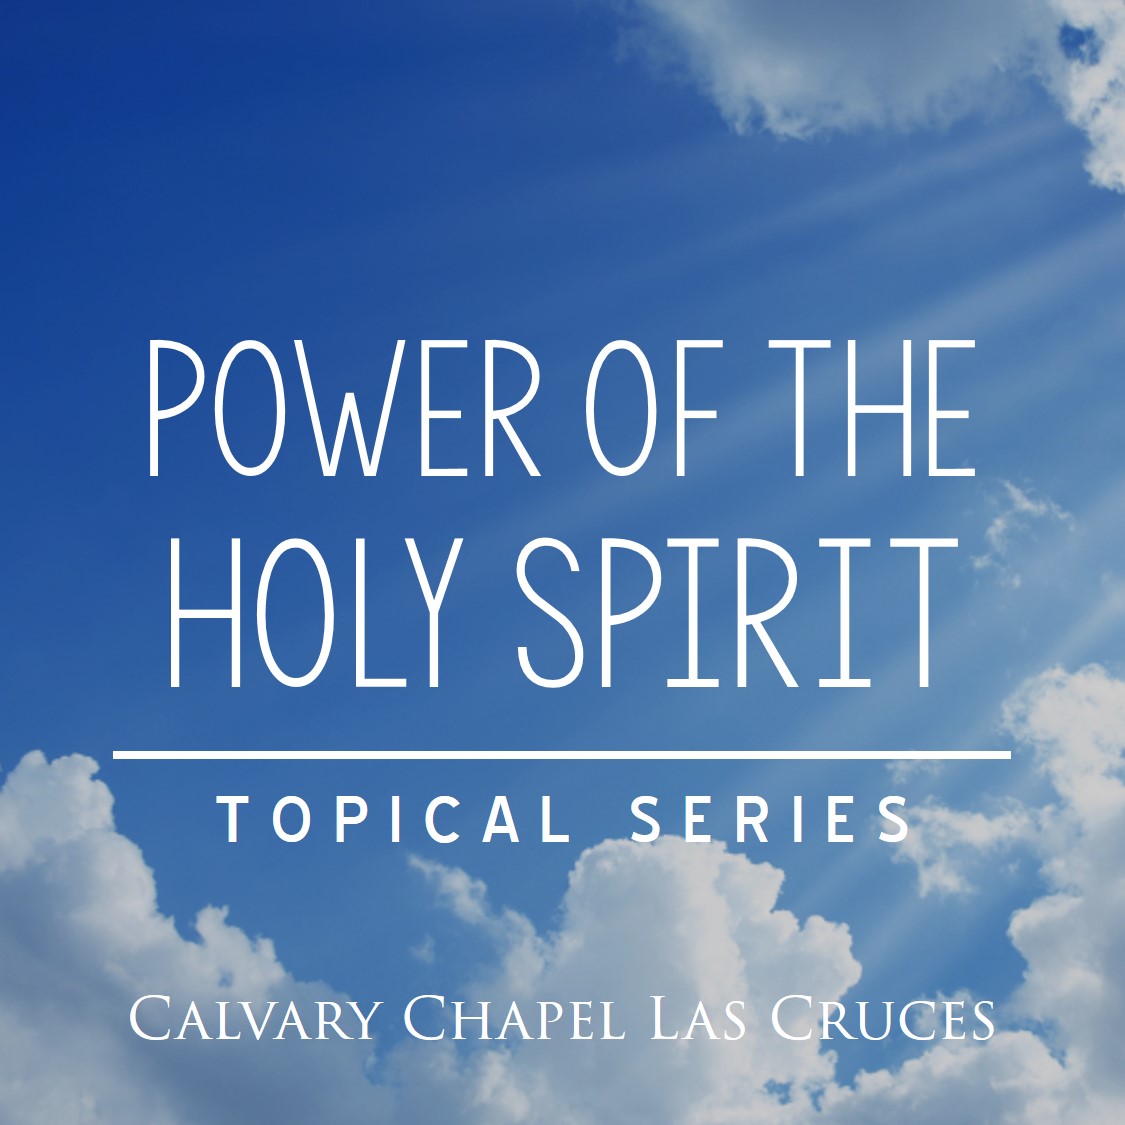 The Power of the Holy Spirit, Part 9